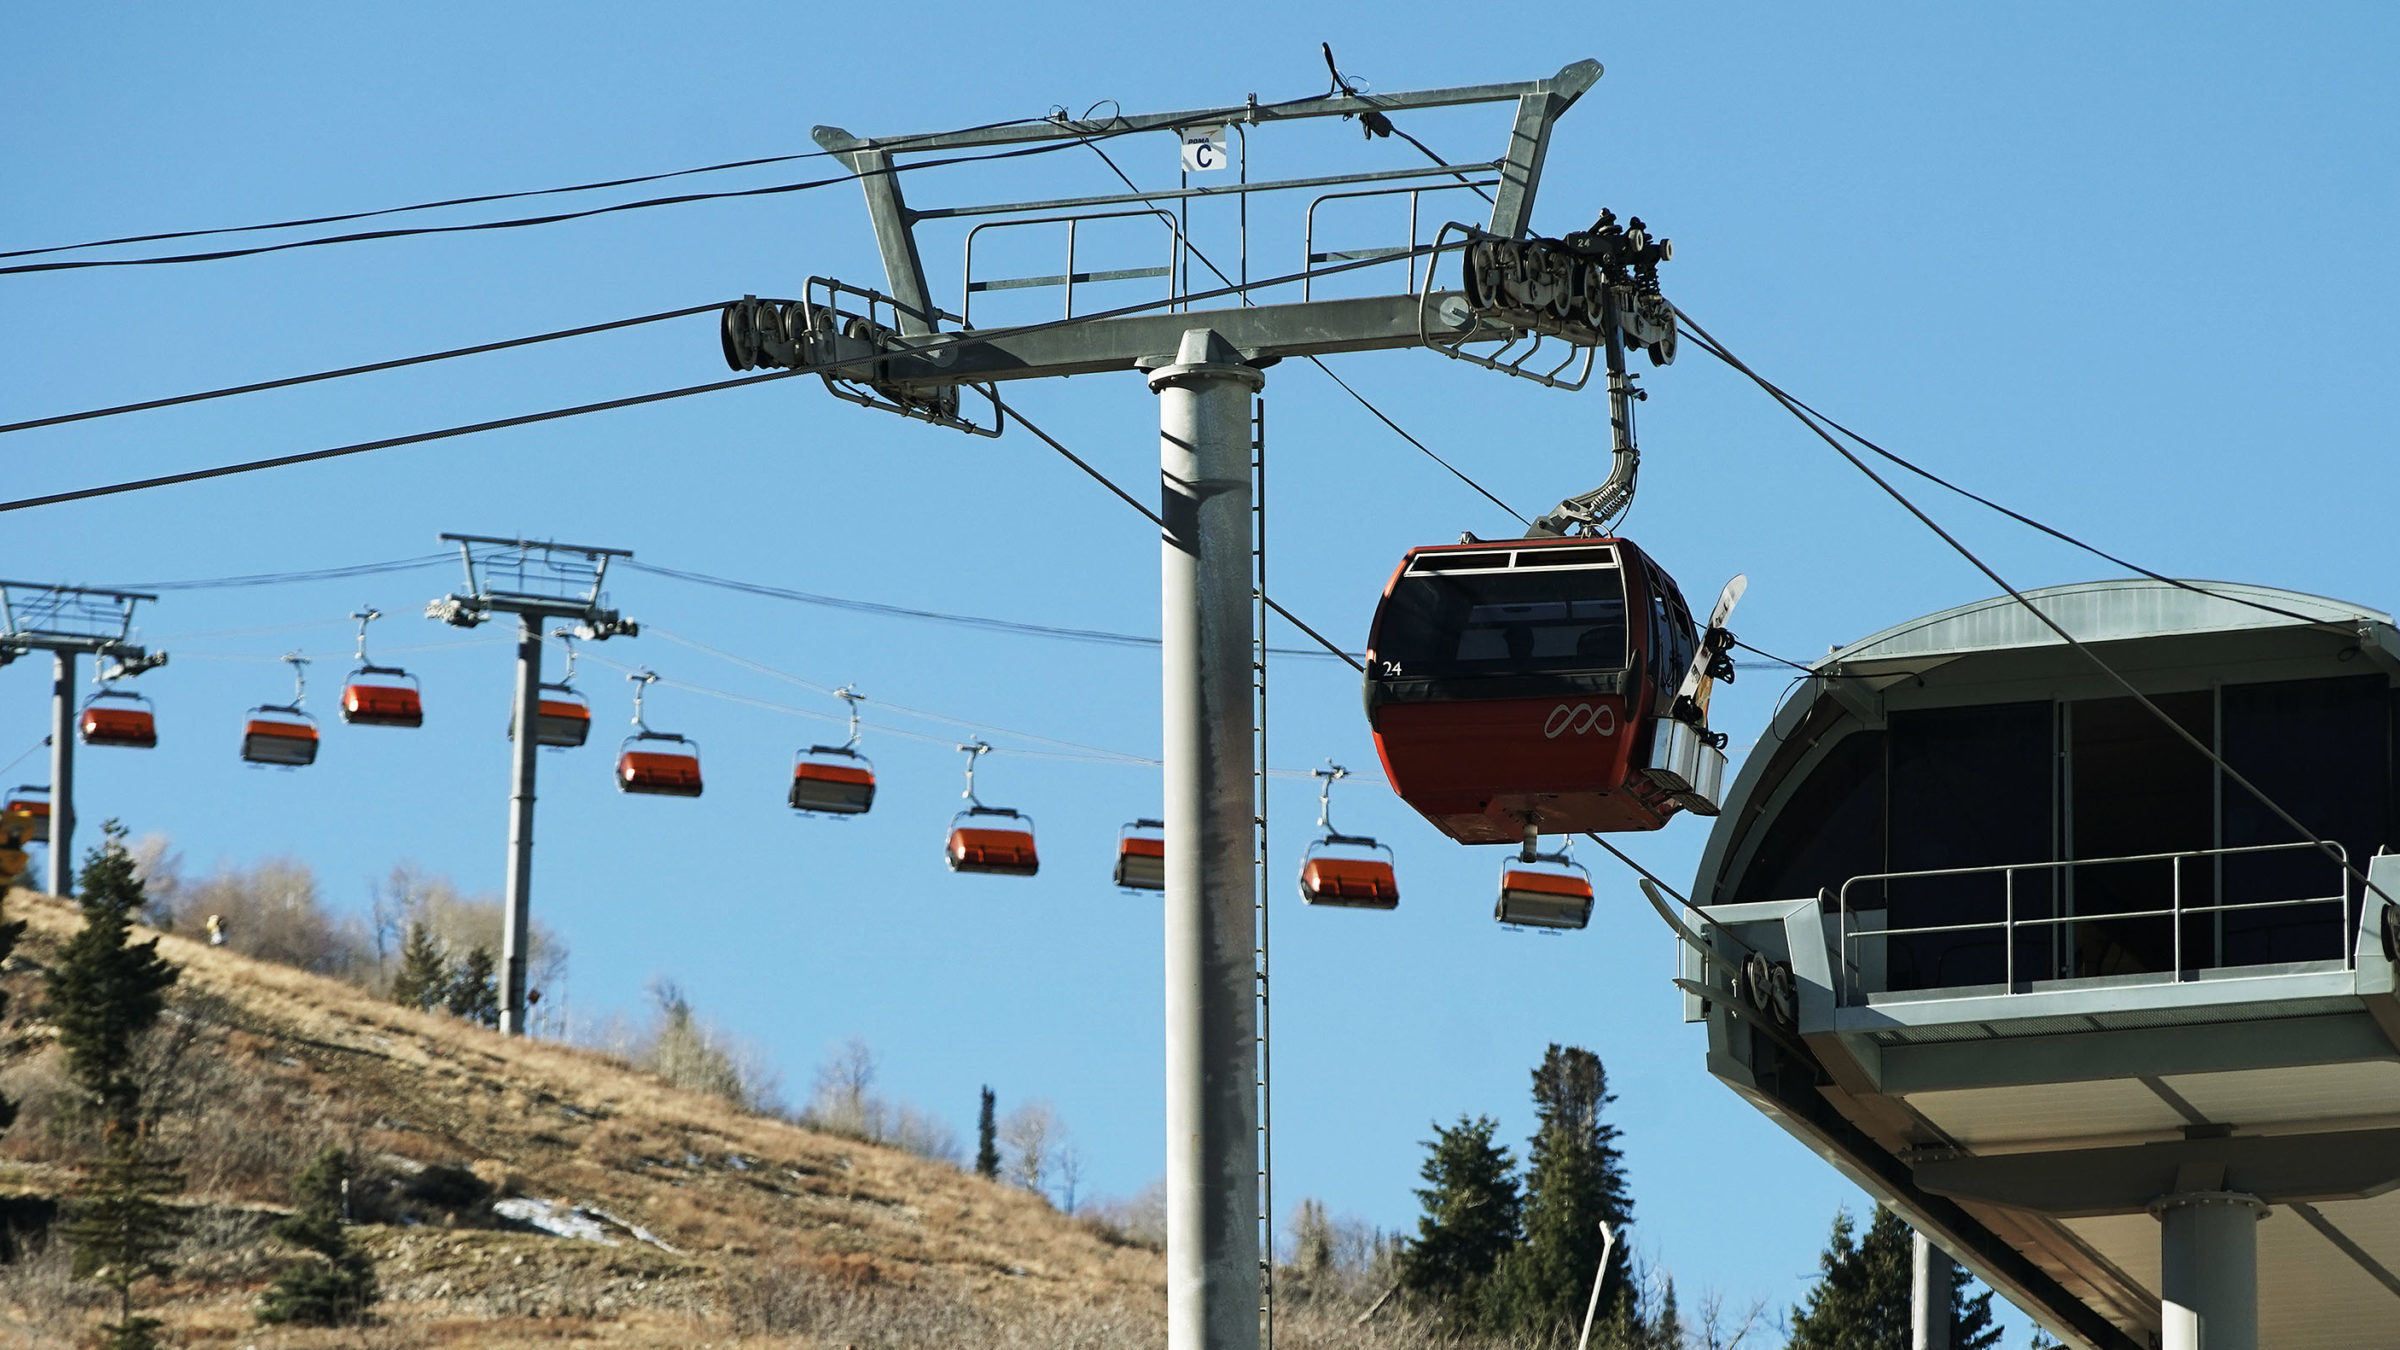 Gondola pictured. Little Cottonwood Canyon might be getting a gondola...